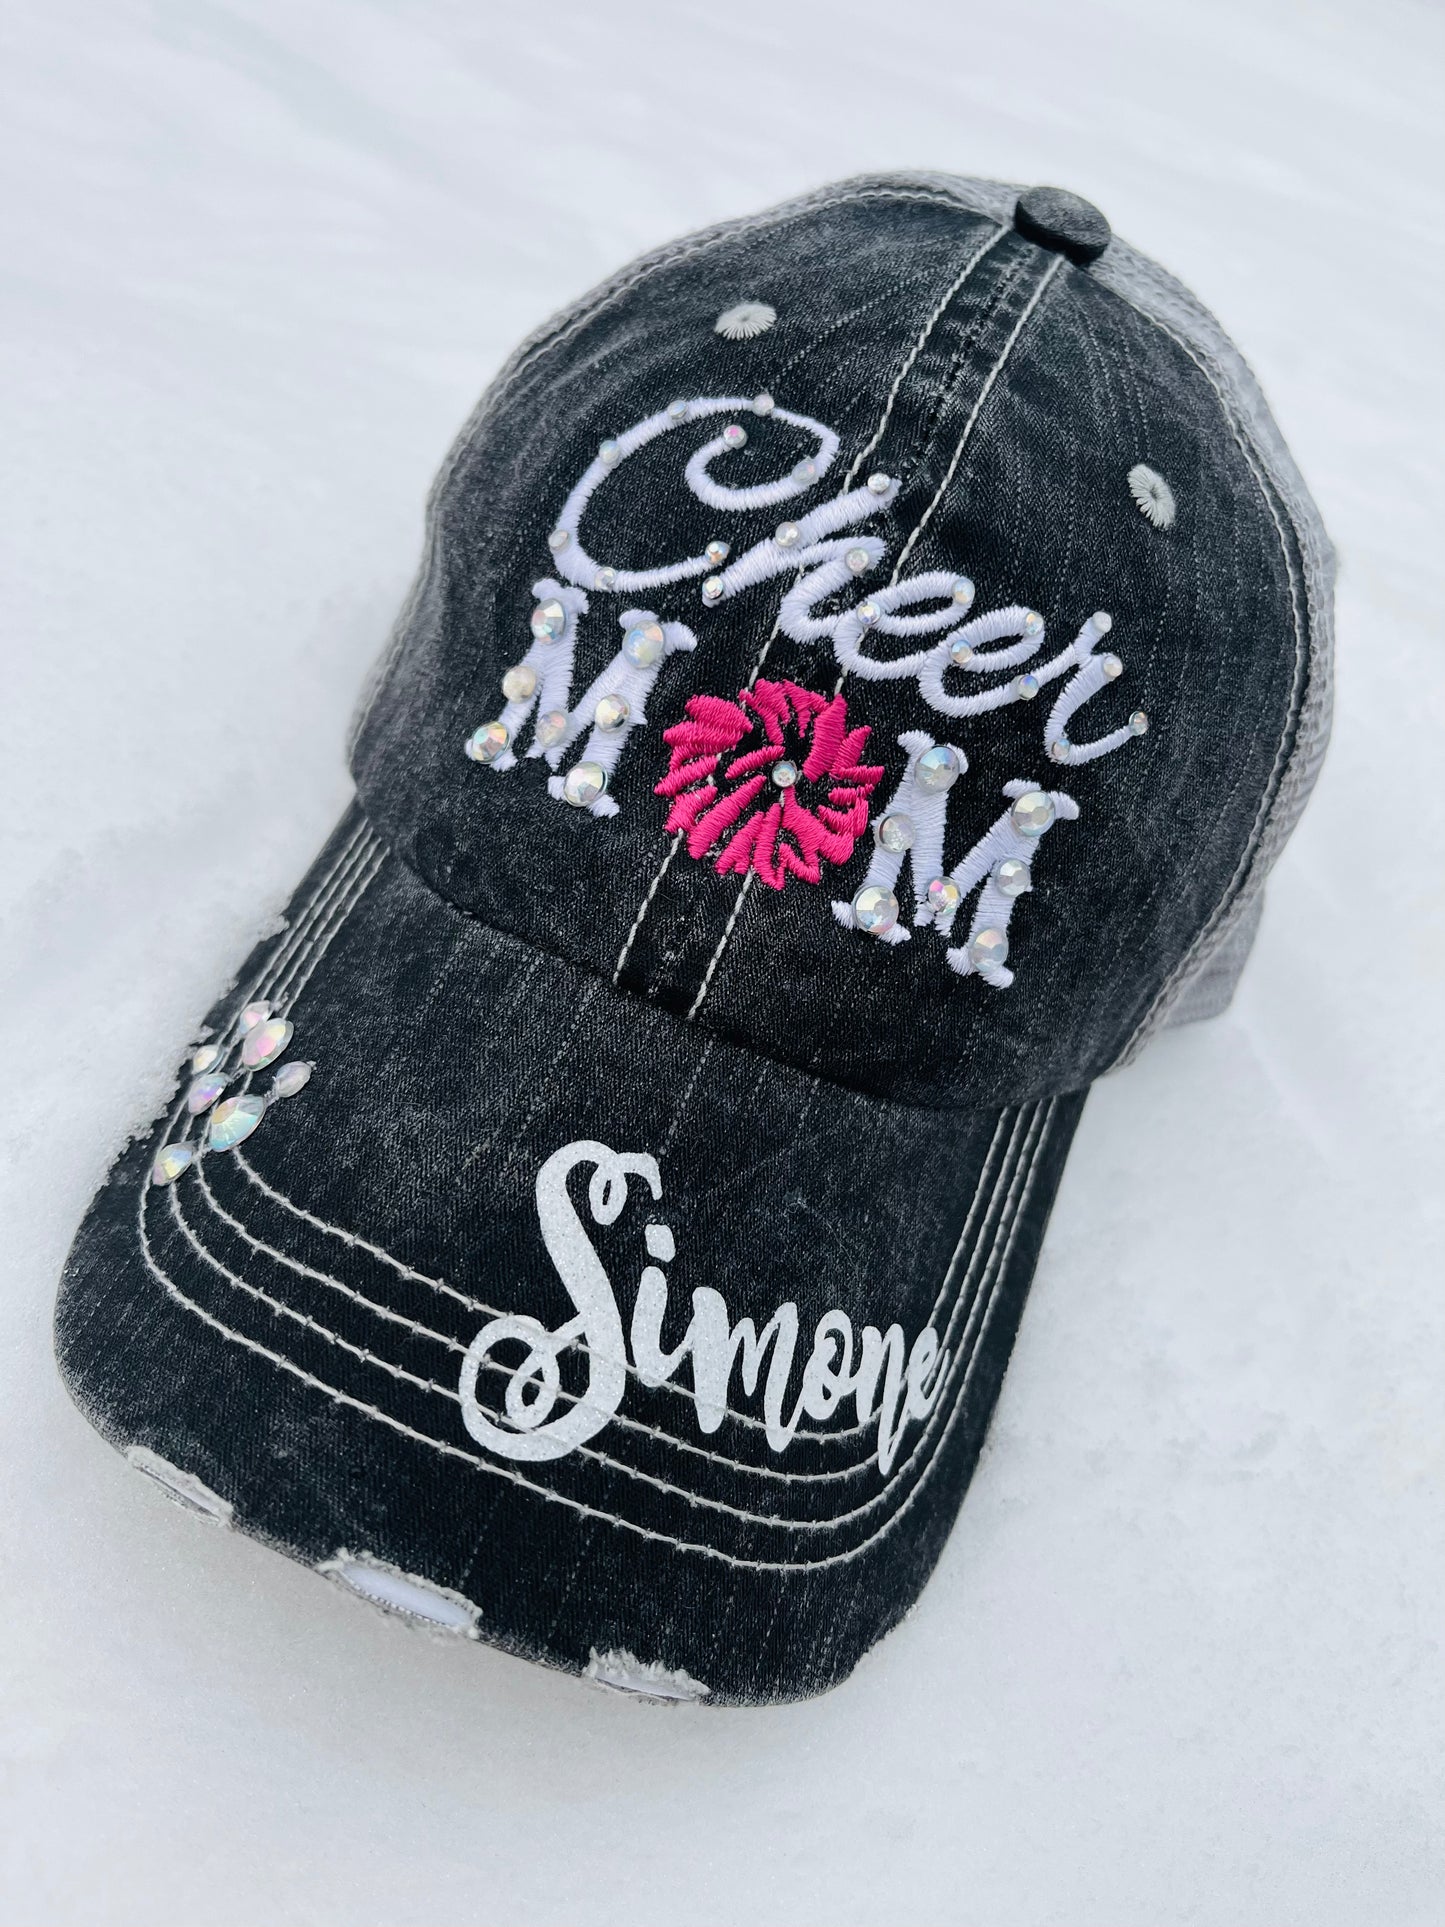 Hats Cheer mom Embroidered distressed trucker cap adjustable velcro • Pom poms Ballet shoes Personalized Bling